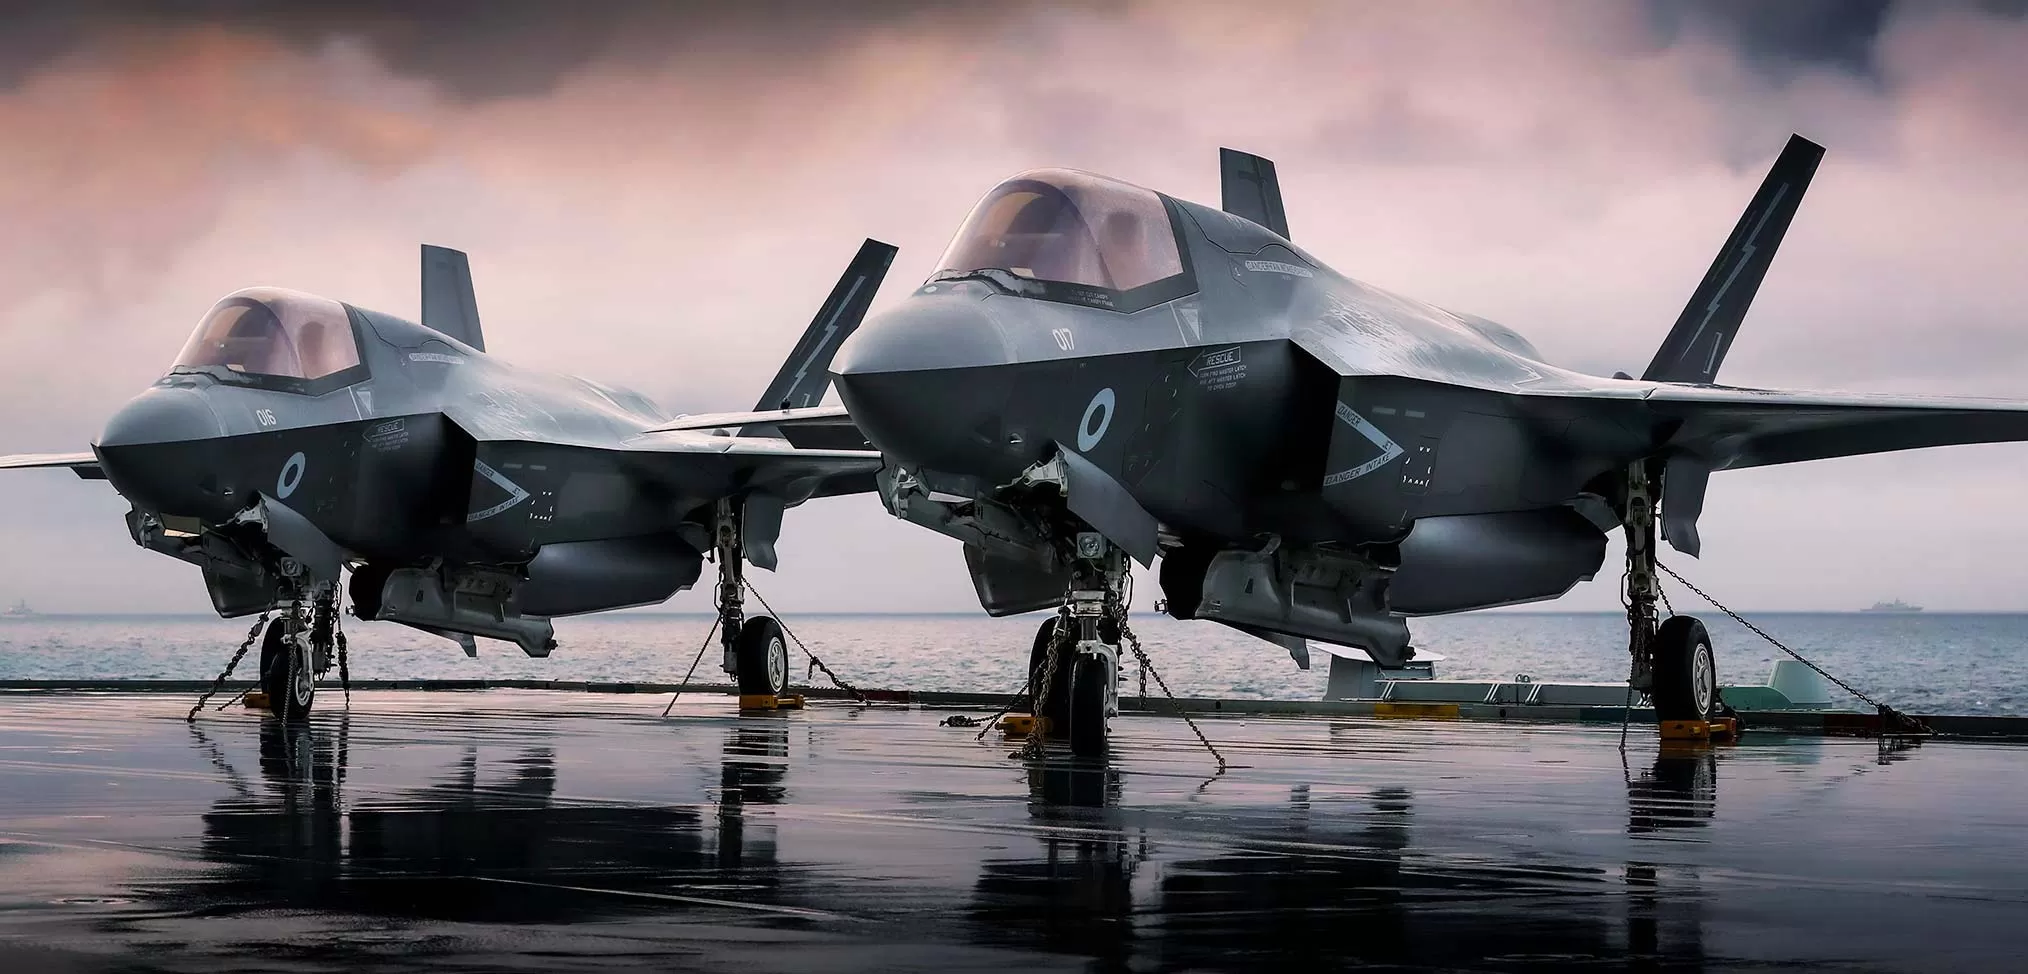 The cost of the F-35A Lightning II will increase by $3.7-4.3 million to about $70 million, not including the F135 engine